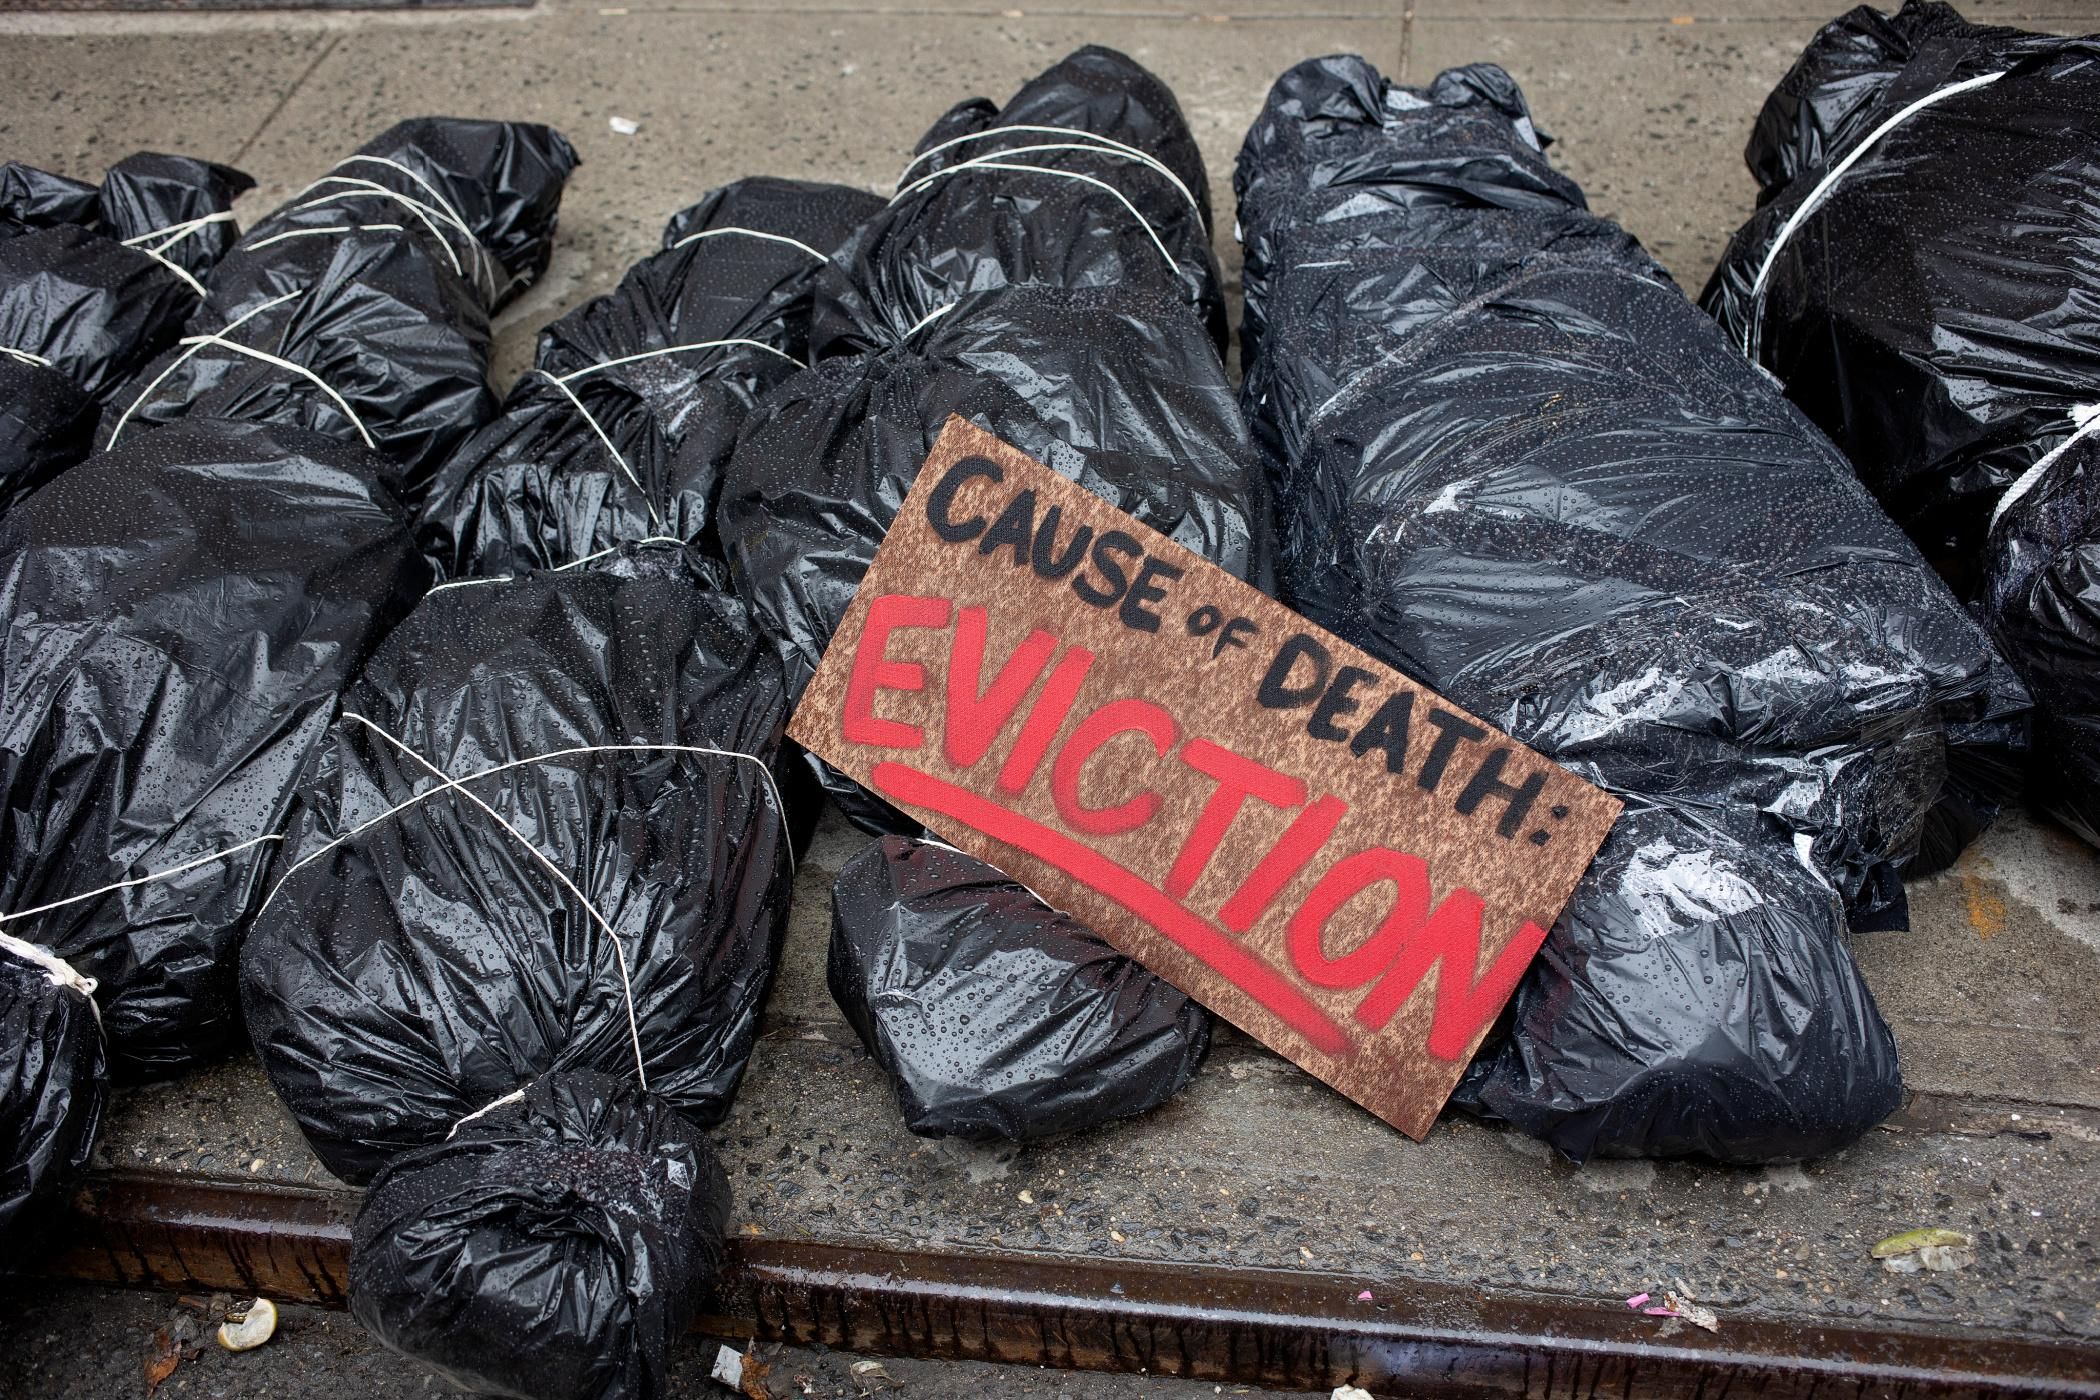 Tenant rights activists protesting inadequate relief for renters during the Covid-19 pandemic leave prop bodies outside the home of New York State Senator Brian Kavanagh on February 28, 2021 in the East Village neighborhood of New York City. (Photo: Andrew Lichtenstein/Corbis via Getty Images)